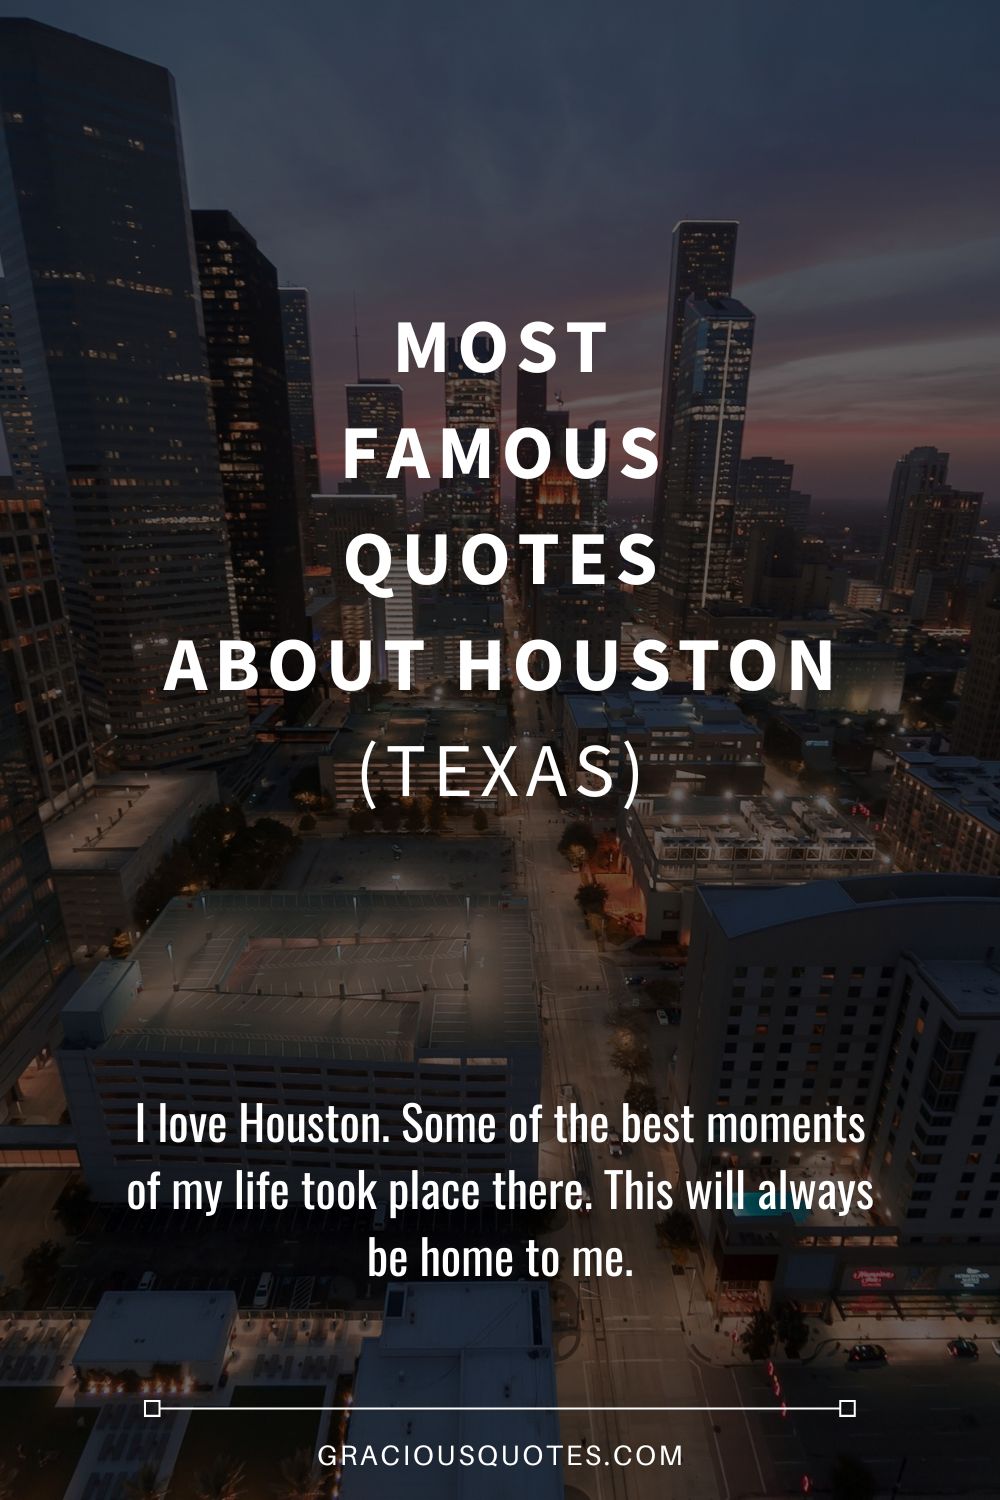 Most Famous Quotes About Houston (TEXAS) - Gracious Quotes